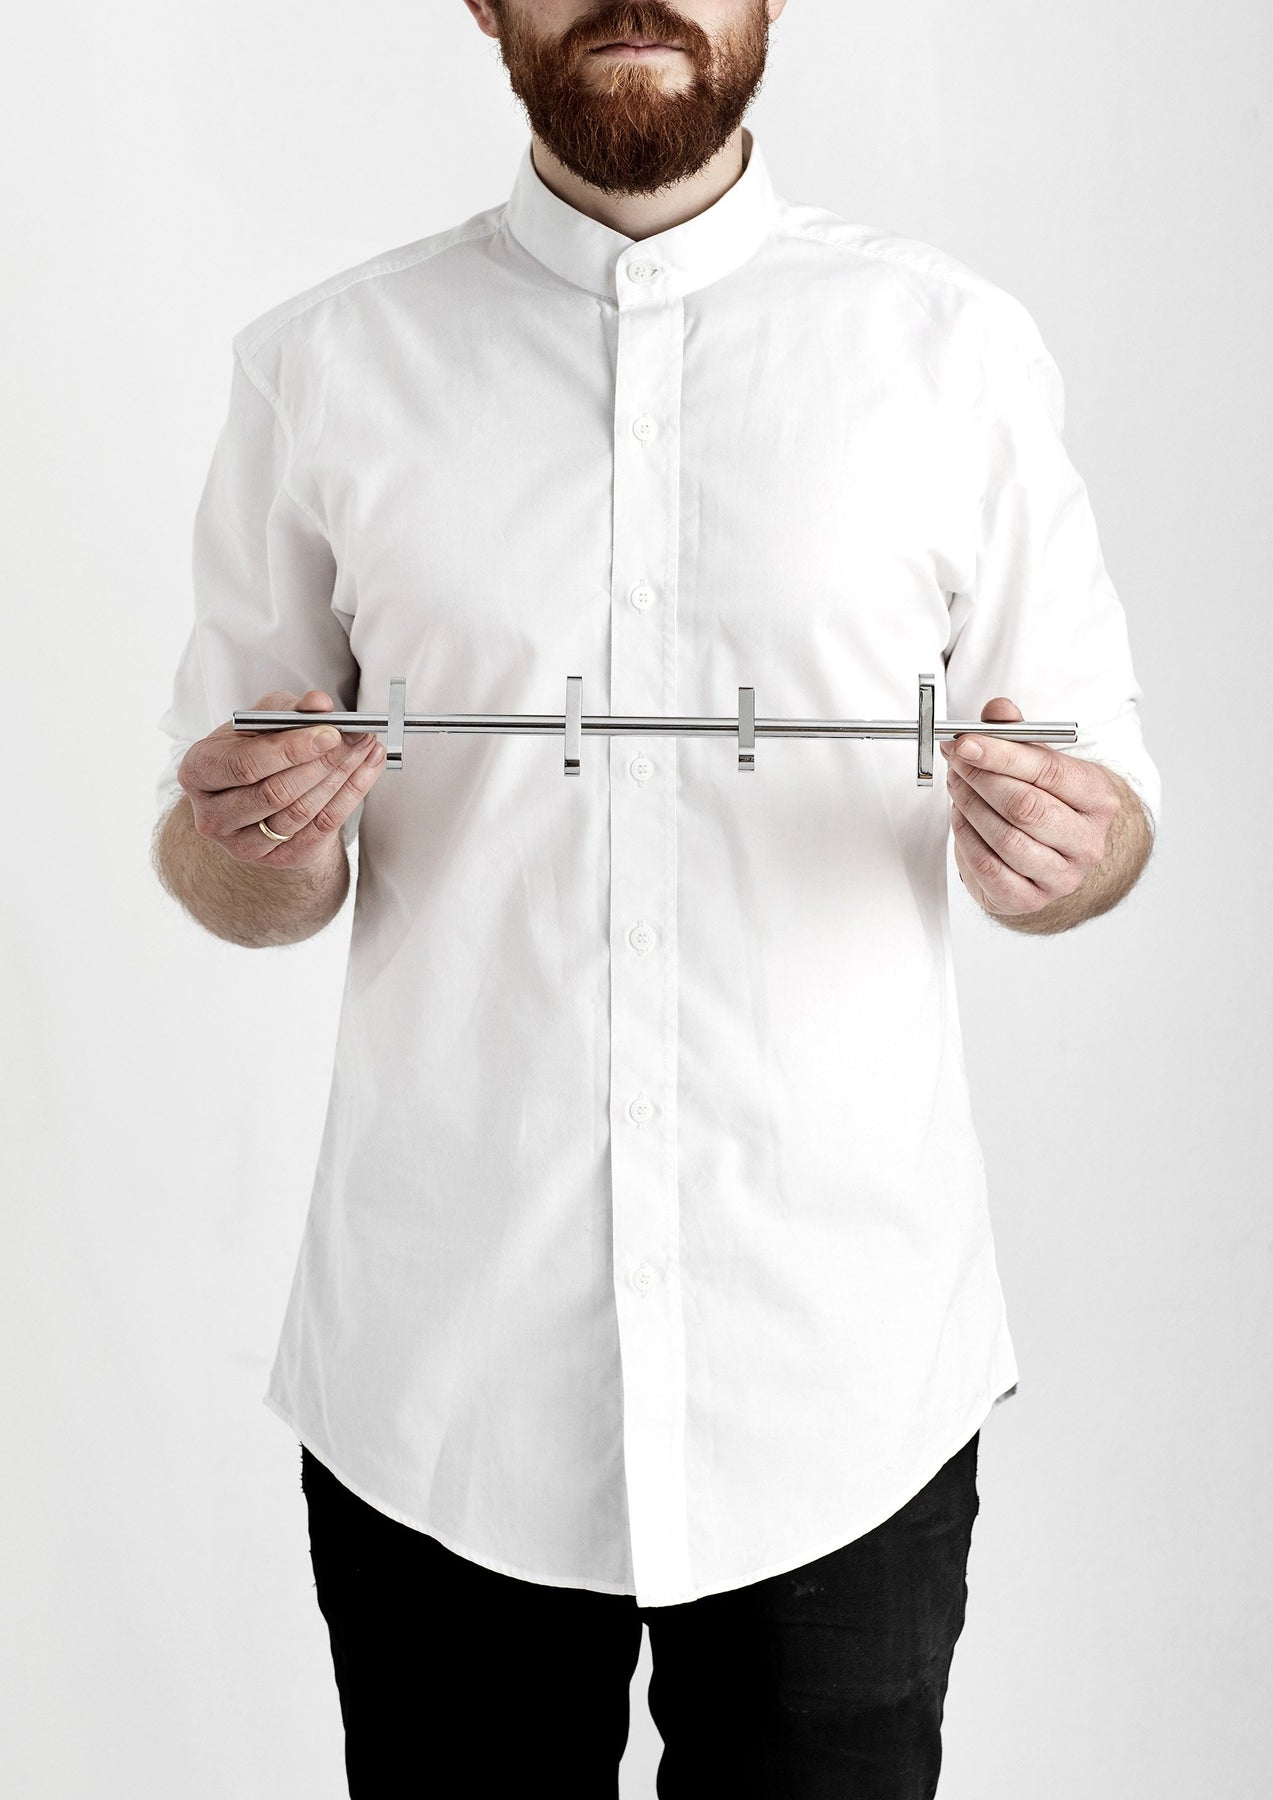 Coat Rack by MOEBE | Doing more, with less. – moebe.dk